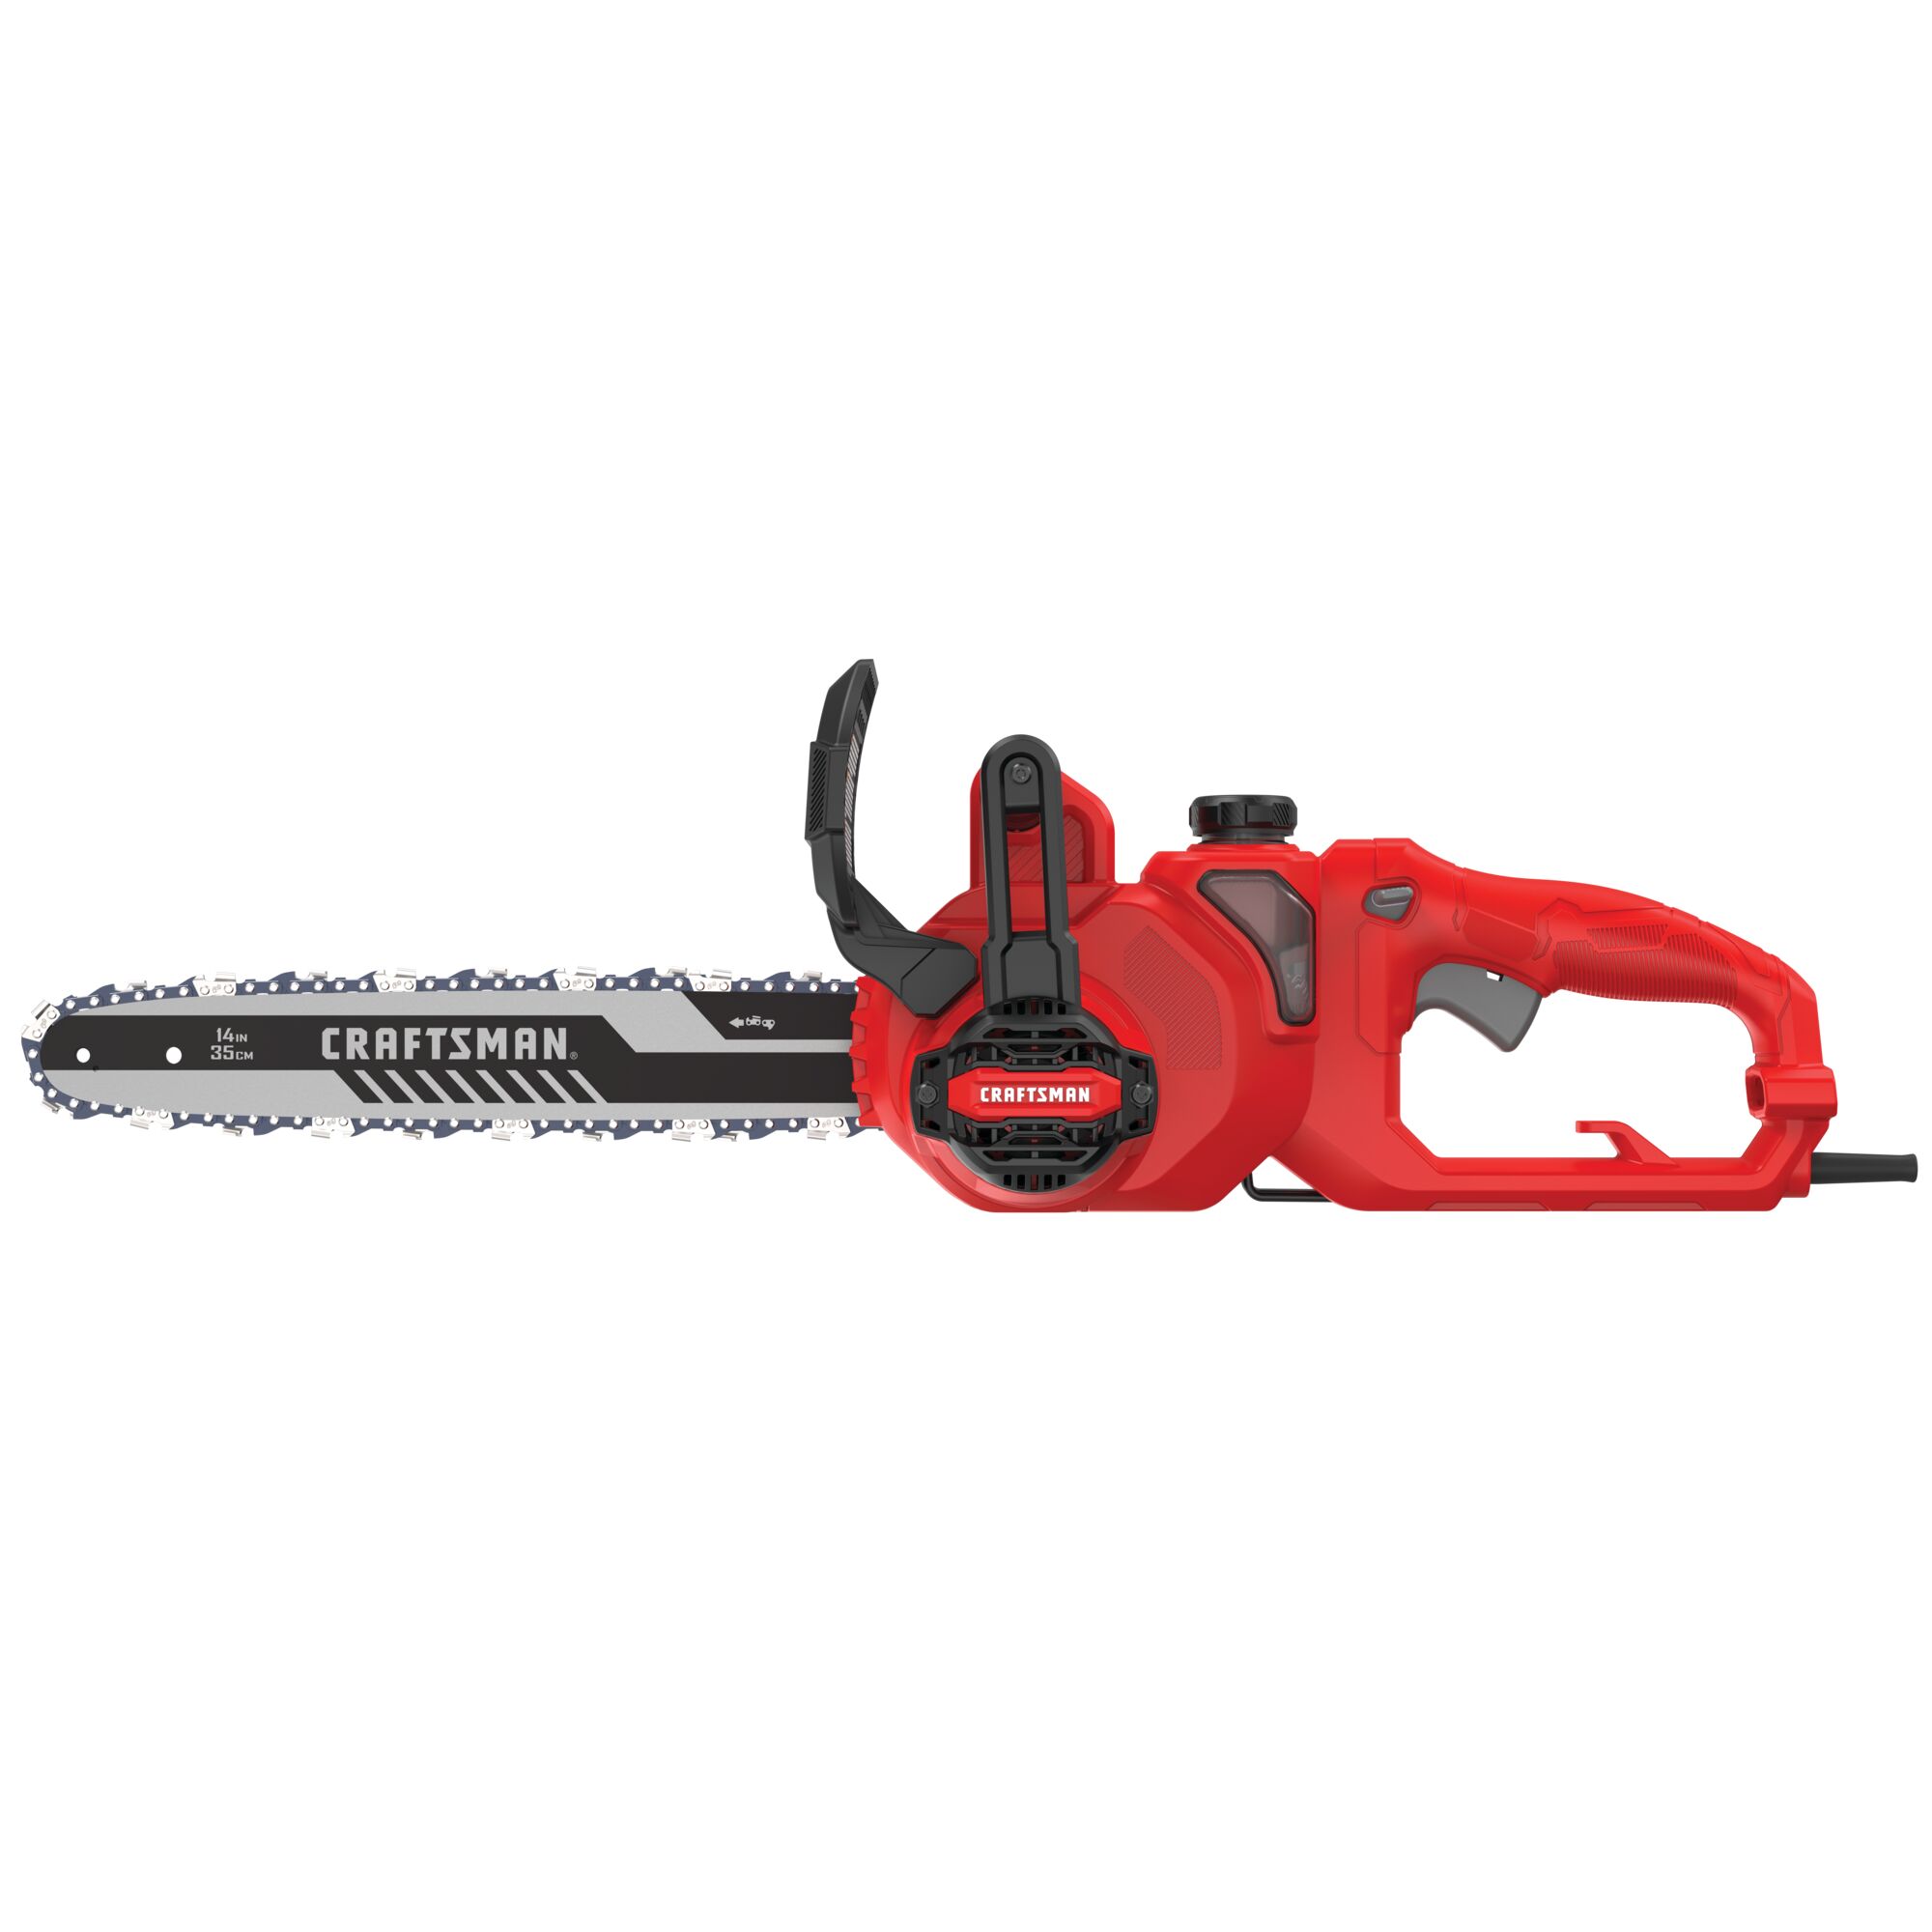 Profile of 8 amp 14 inches corded chainsaw .